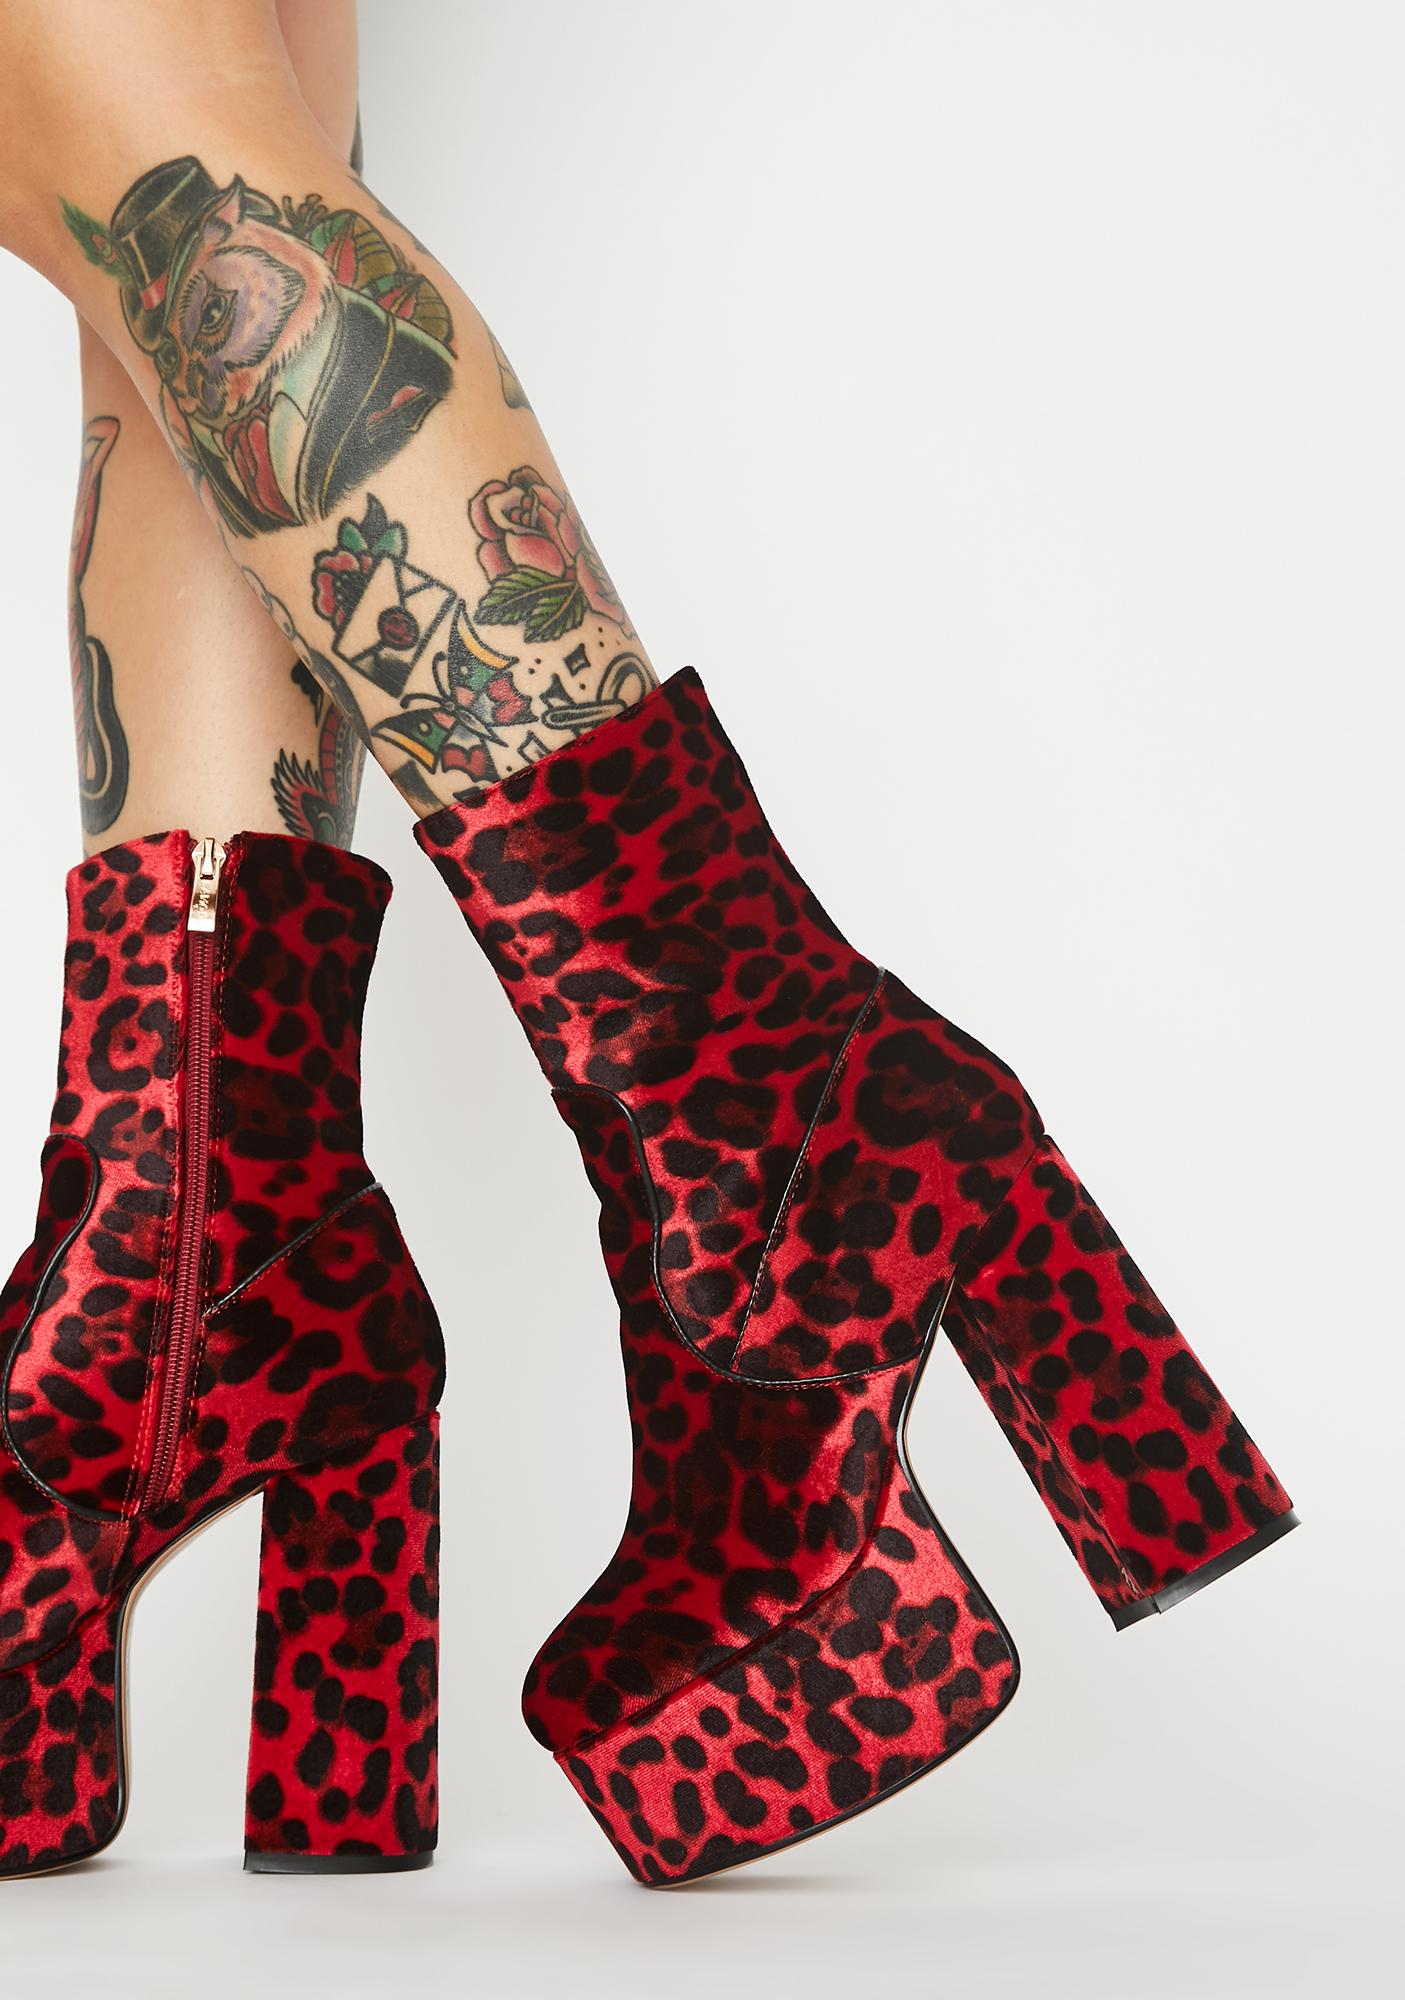 red and leopard print heels